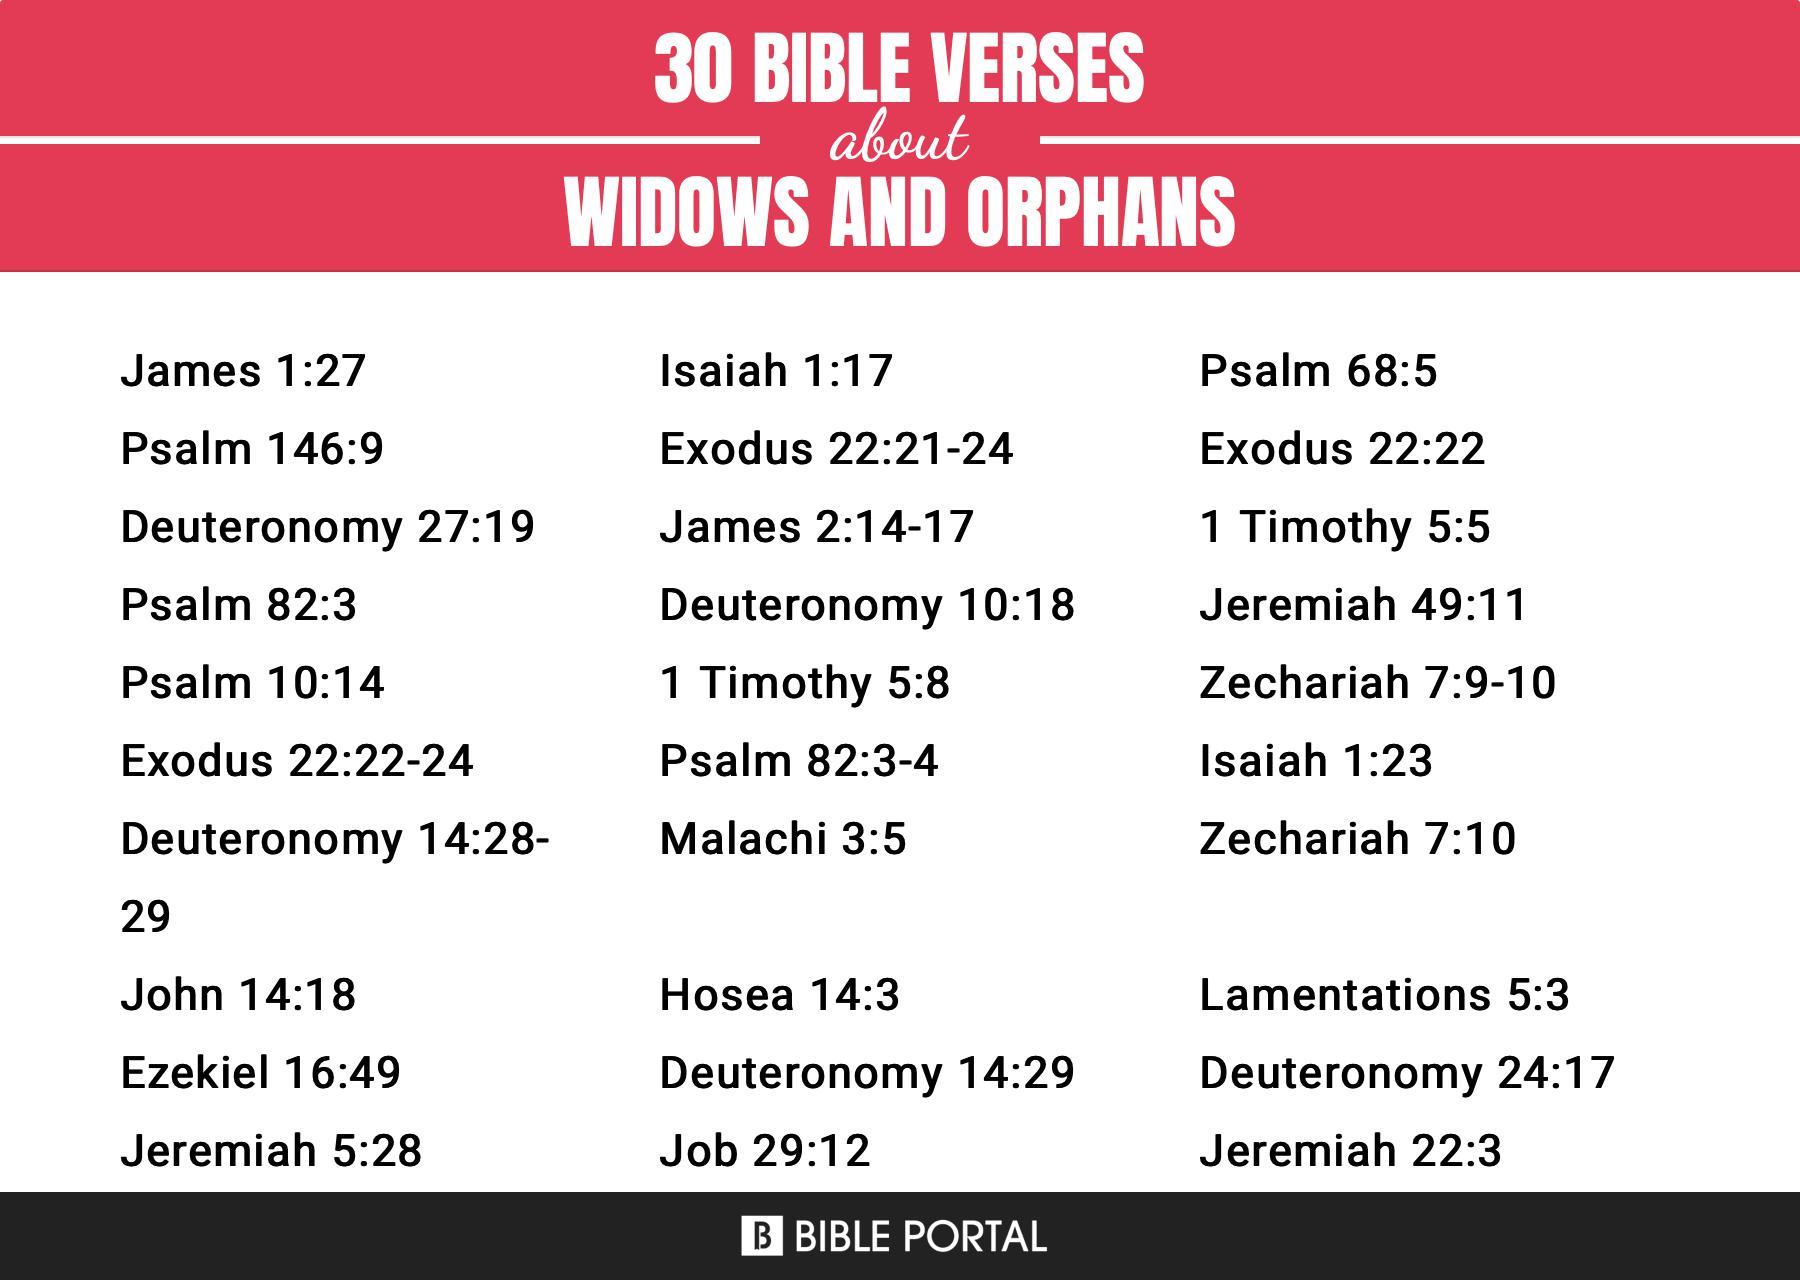 What Does the Bible Say about Widows And Orphans?